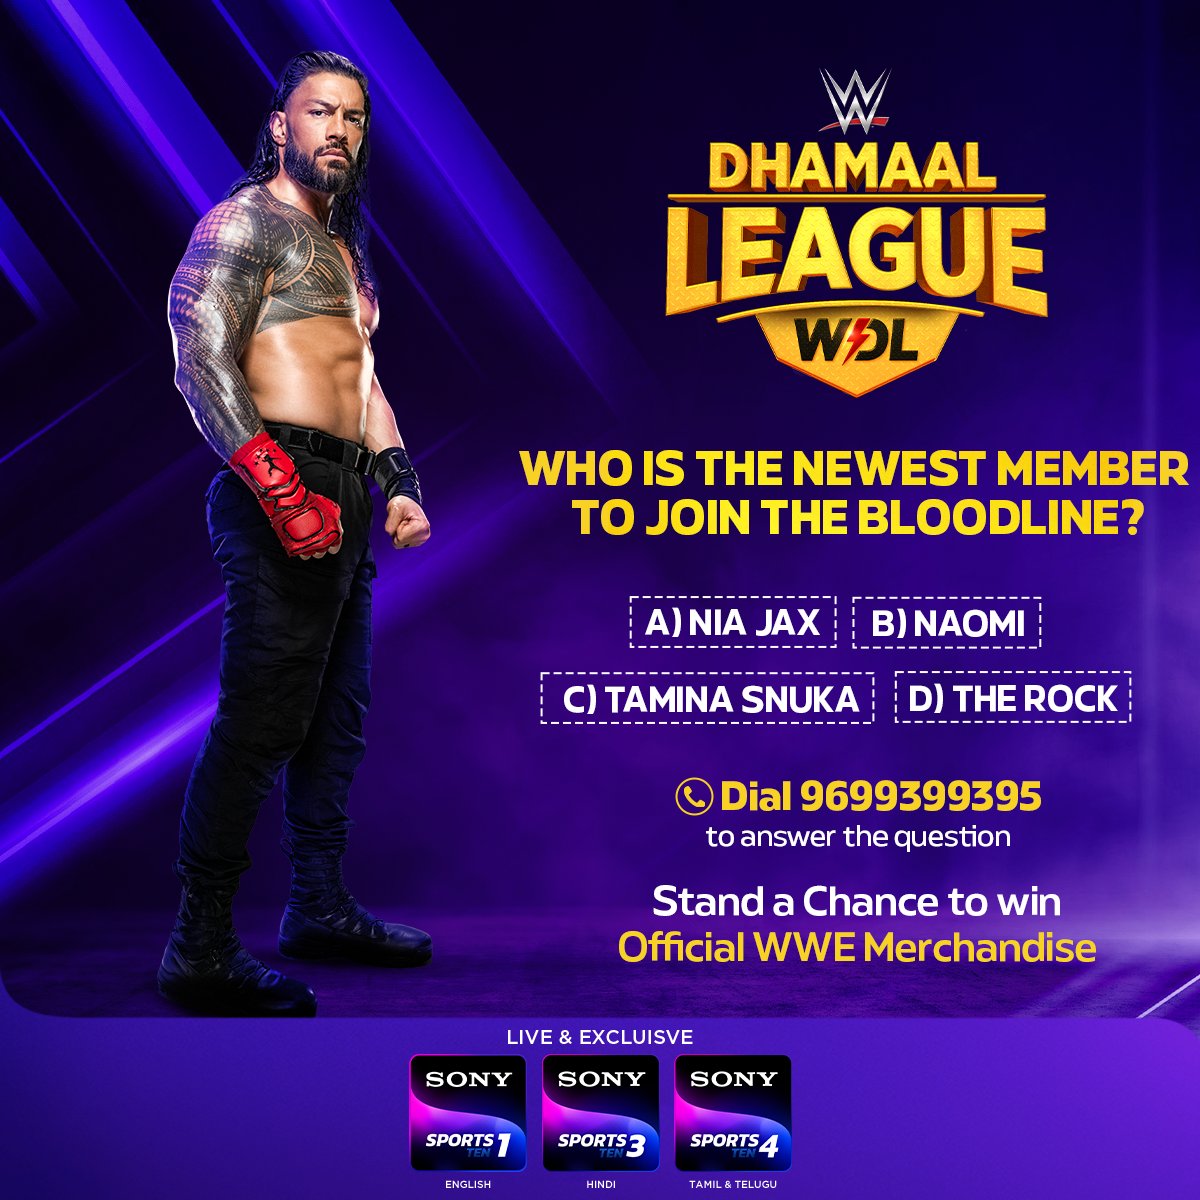 One of the strongest stables in the #WWE 💪🩸

#SonySportsNetwork #WWEIndia #WWEDhamaalLeague